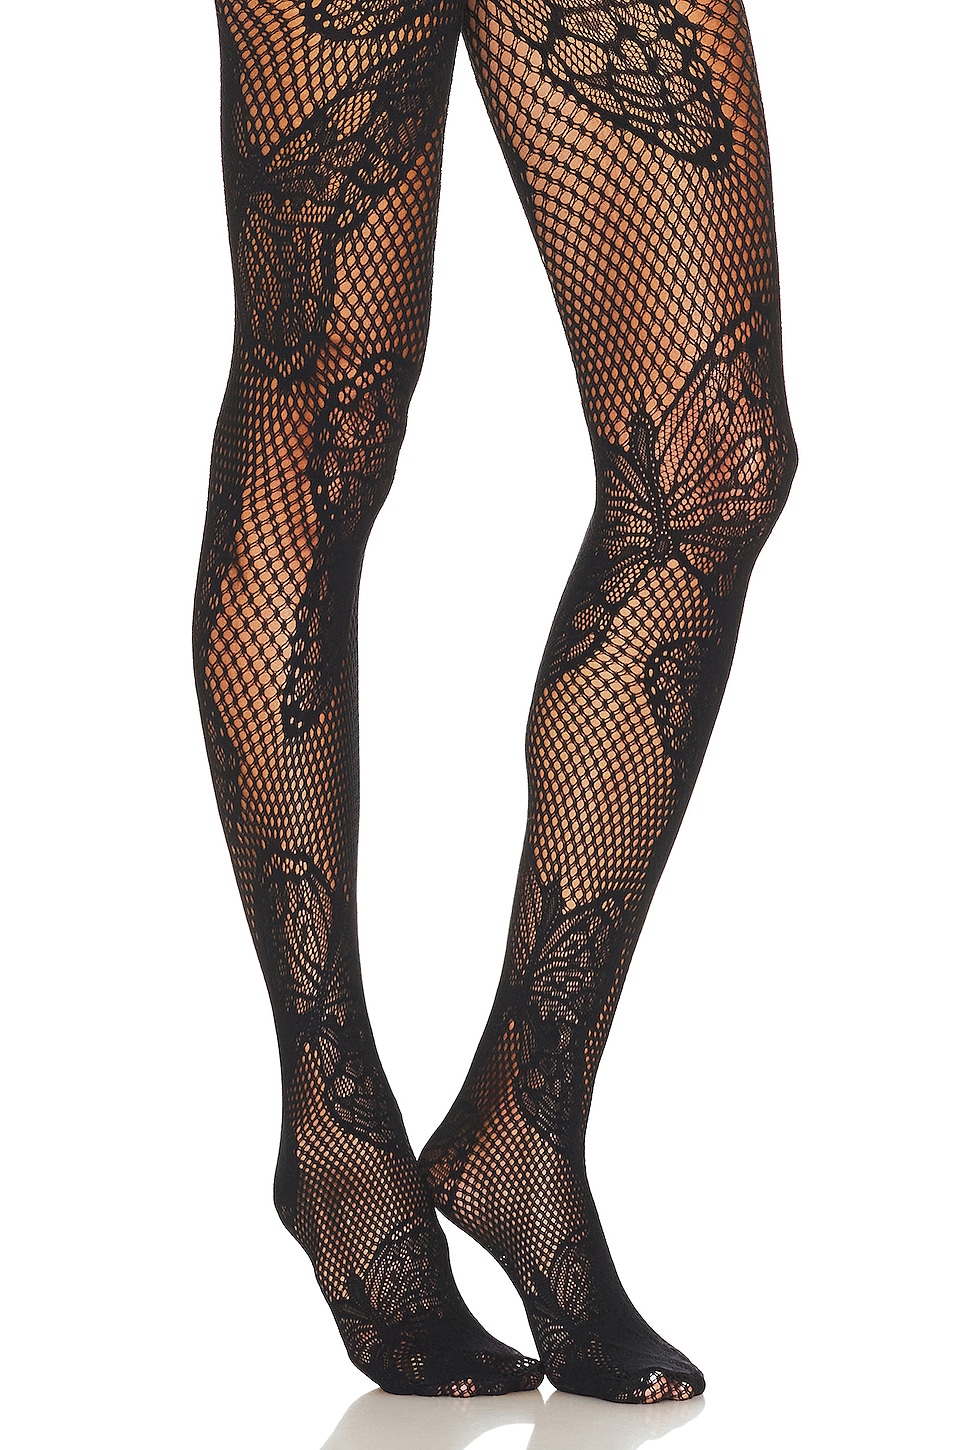 HELLORSO Nylon Tights Women Velet Bodysuits Sexy Black Thin Butterfly Print  Pantyhosee Stockings at  Women's Clothing store